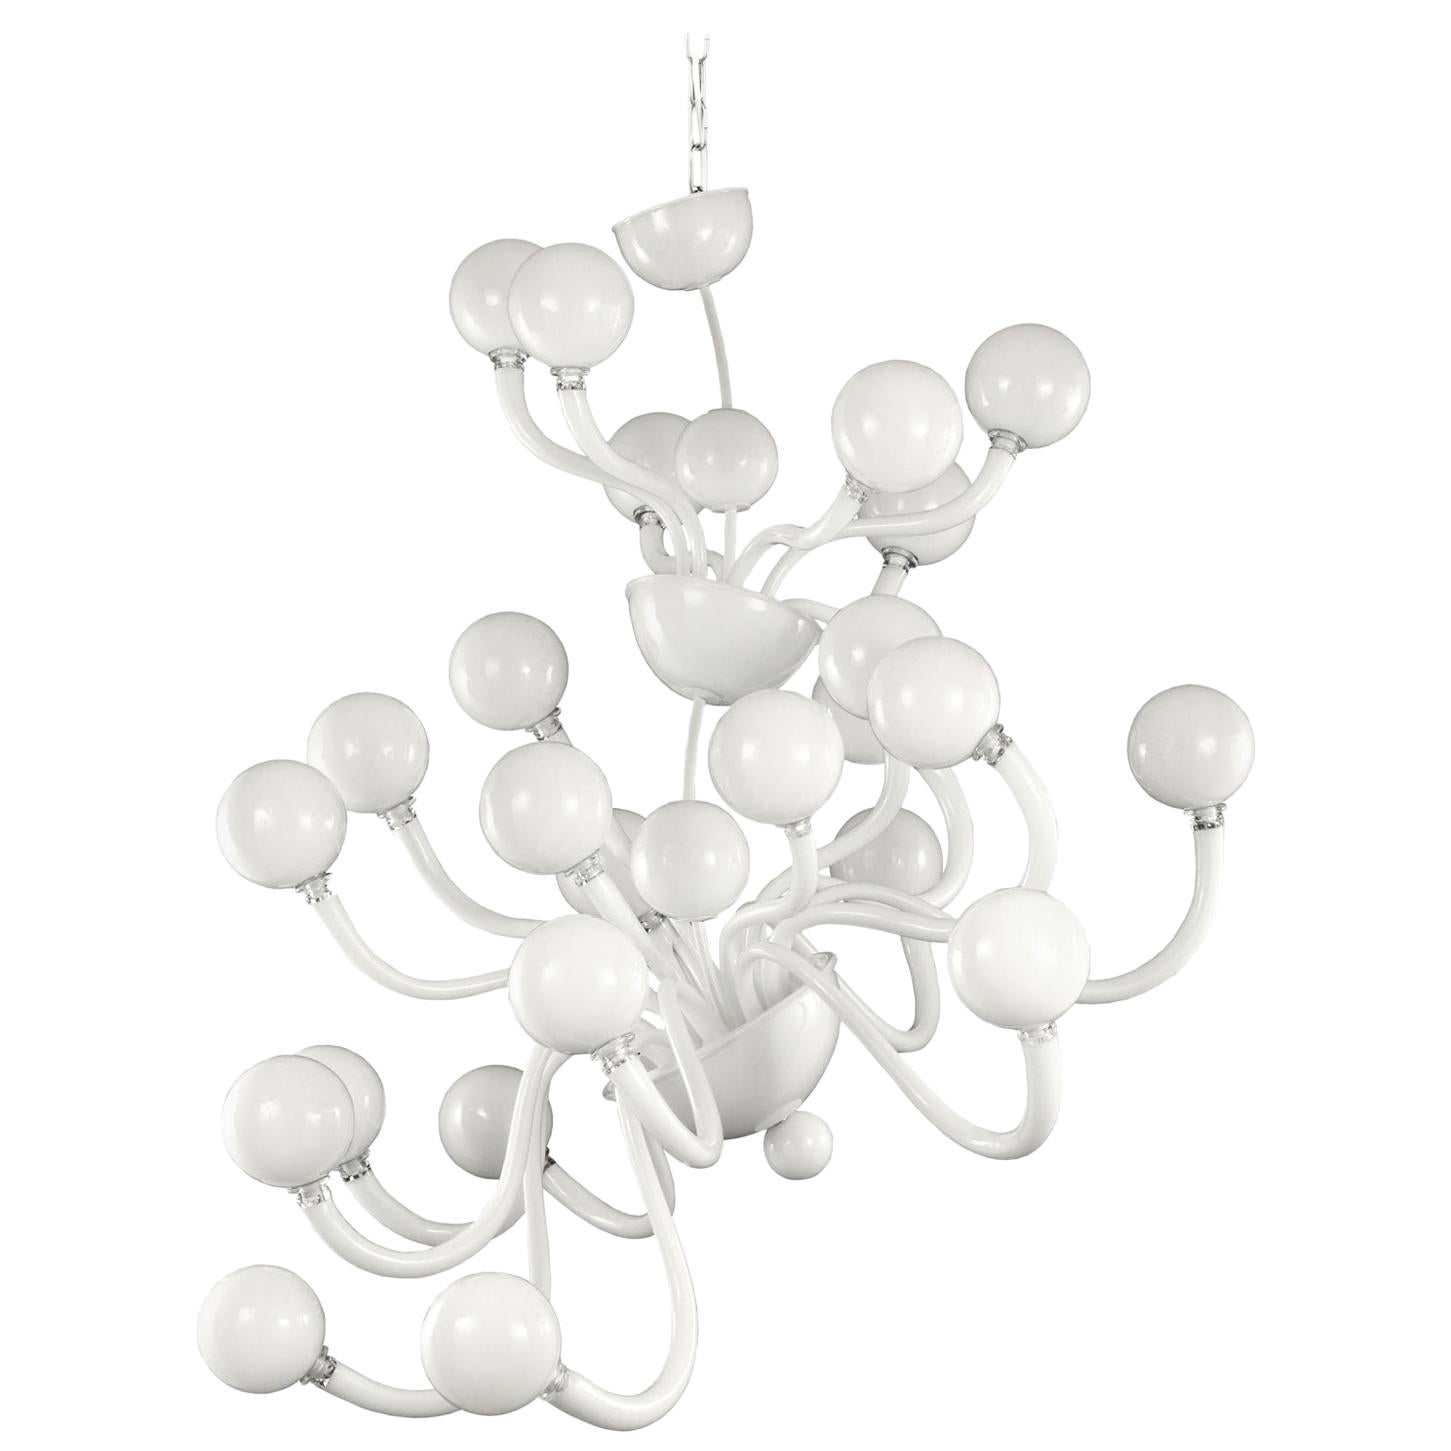 21st Century Artistic  Chandelier 24 Arms White Murano Glass by Multiforme For Sale